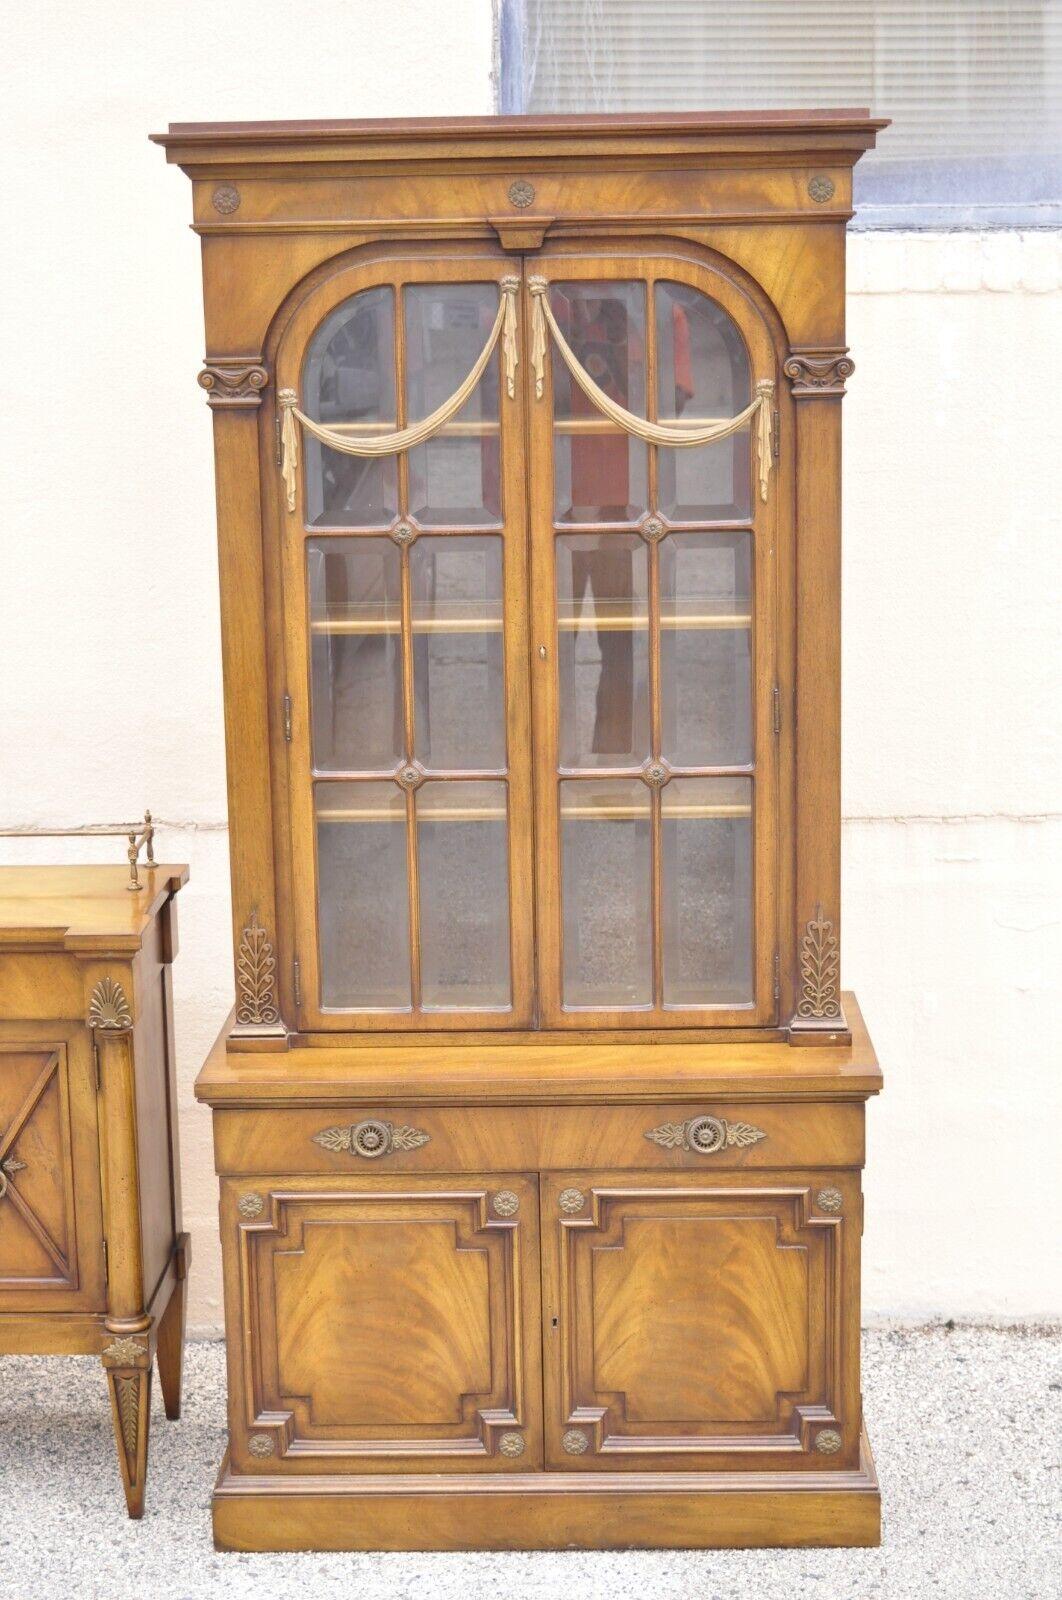 Karges French Neoclassical style Regency mahogany Curio China cabinet - a Pair. Item features cast brass ormolu, beveled glass, carved wood drape accents, pull out desk surface with tooled leather top and additional storage, 4 swing doors, working